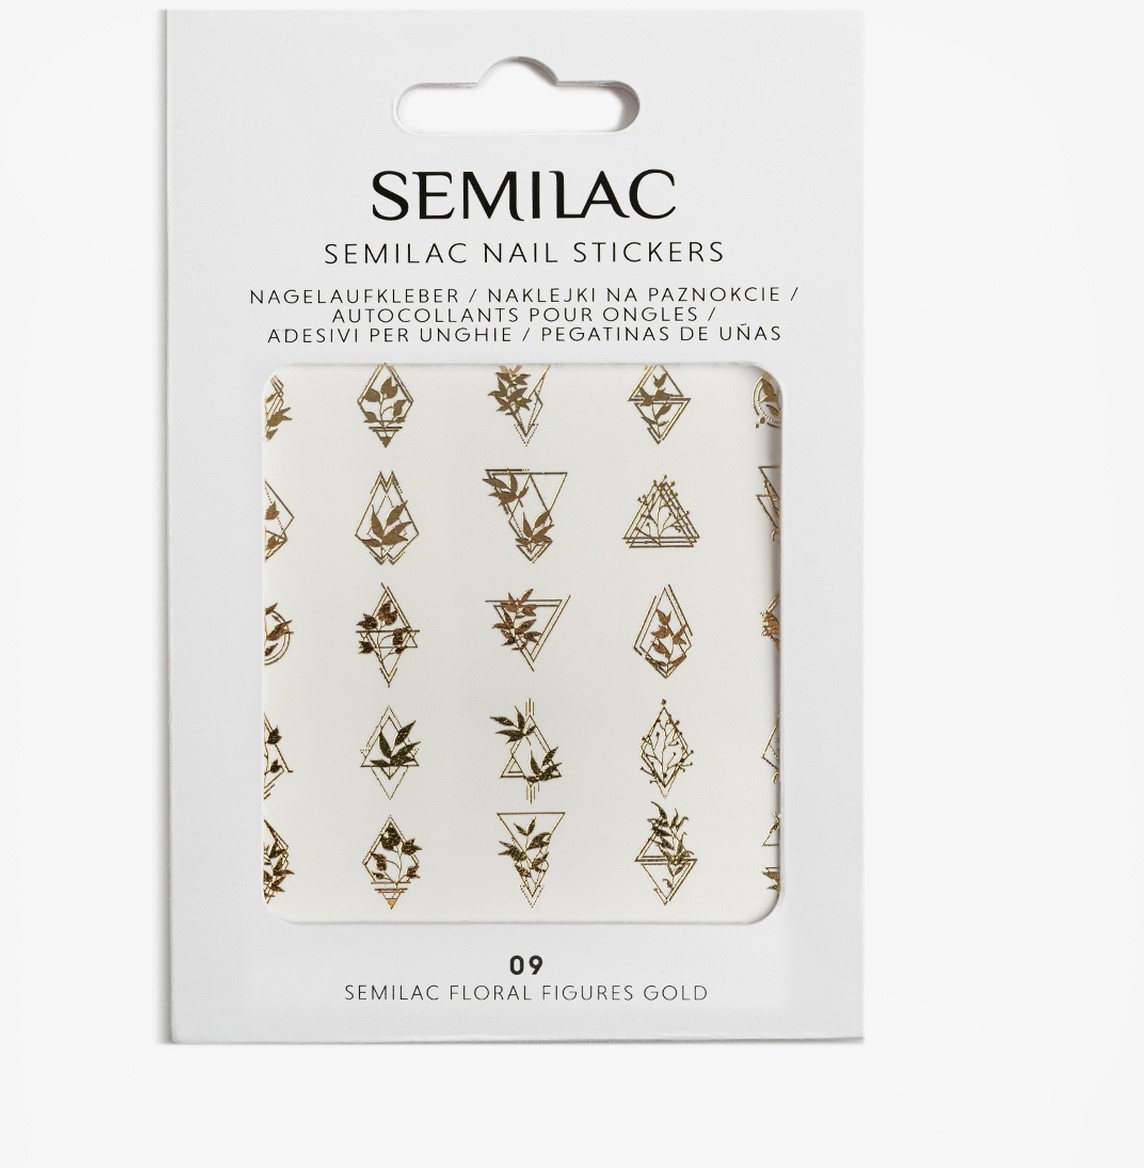 Semilac 09 Floral Gold Nails Stickers